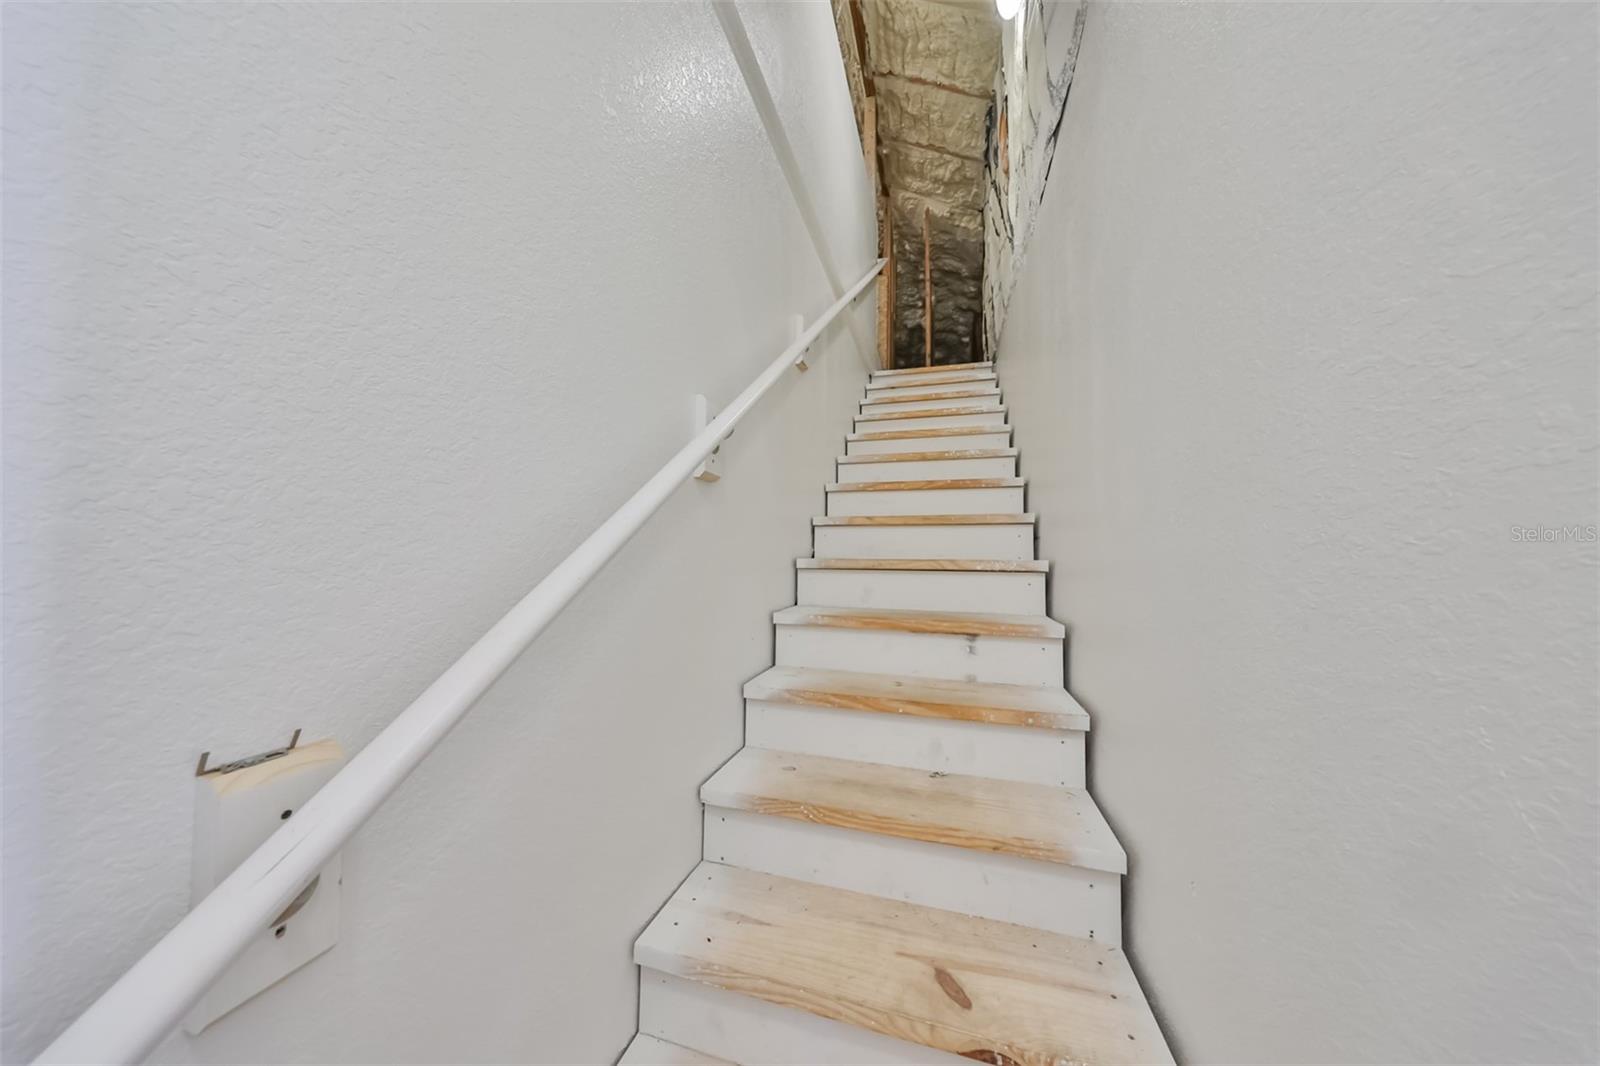 Indoor garage stairs leads up to indoor climate insulated attic, making safety first and comfort a priority.